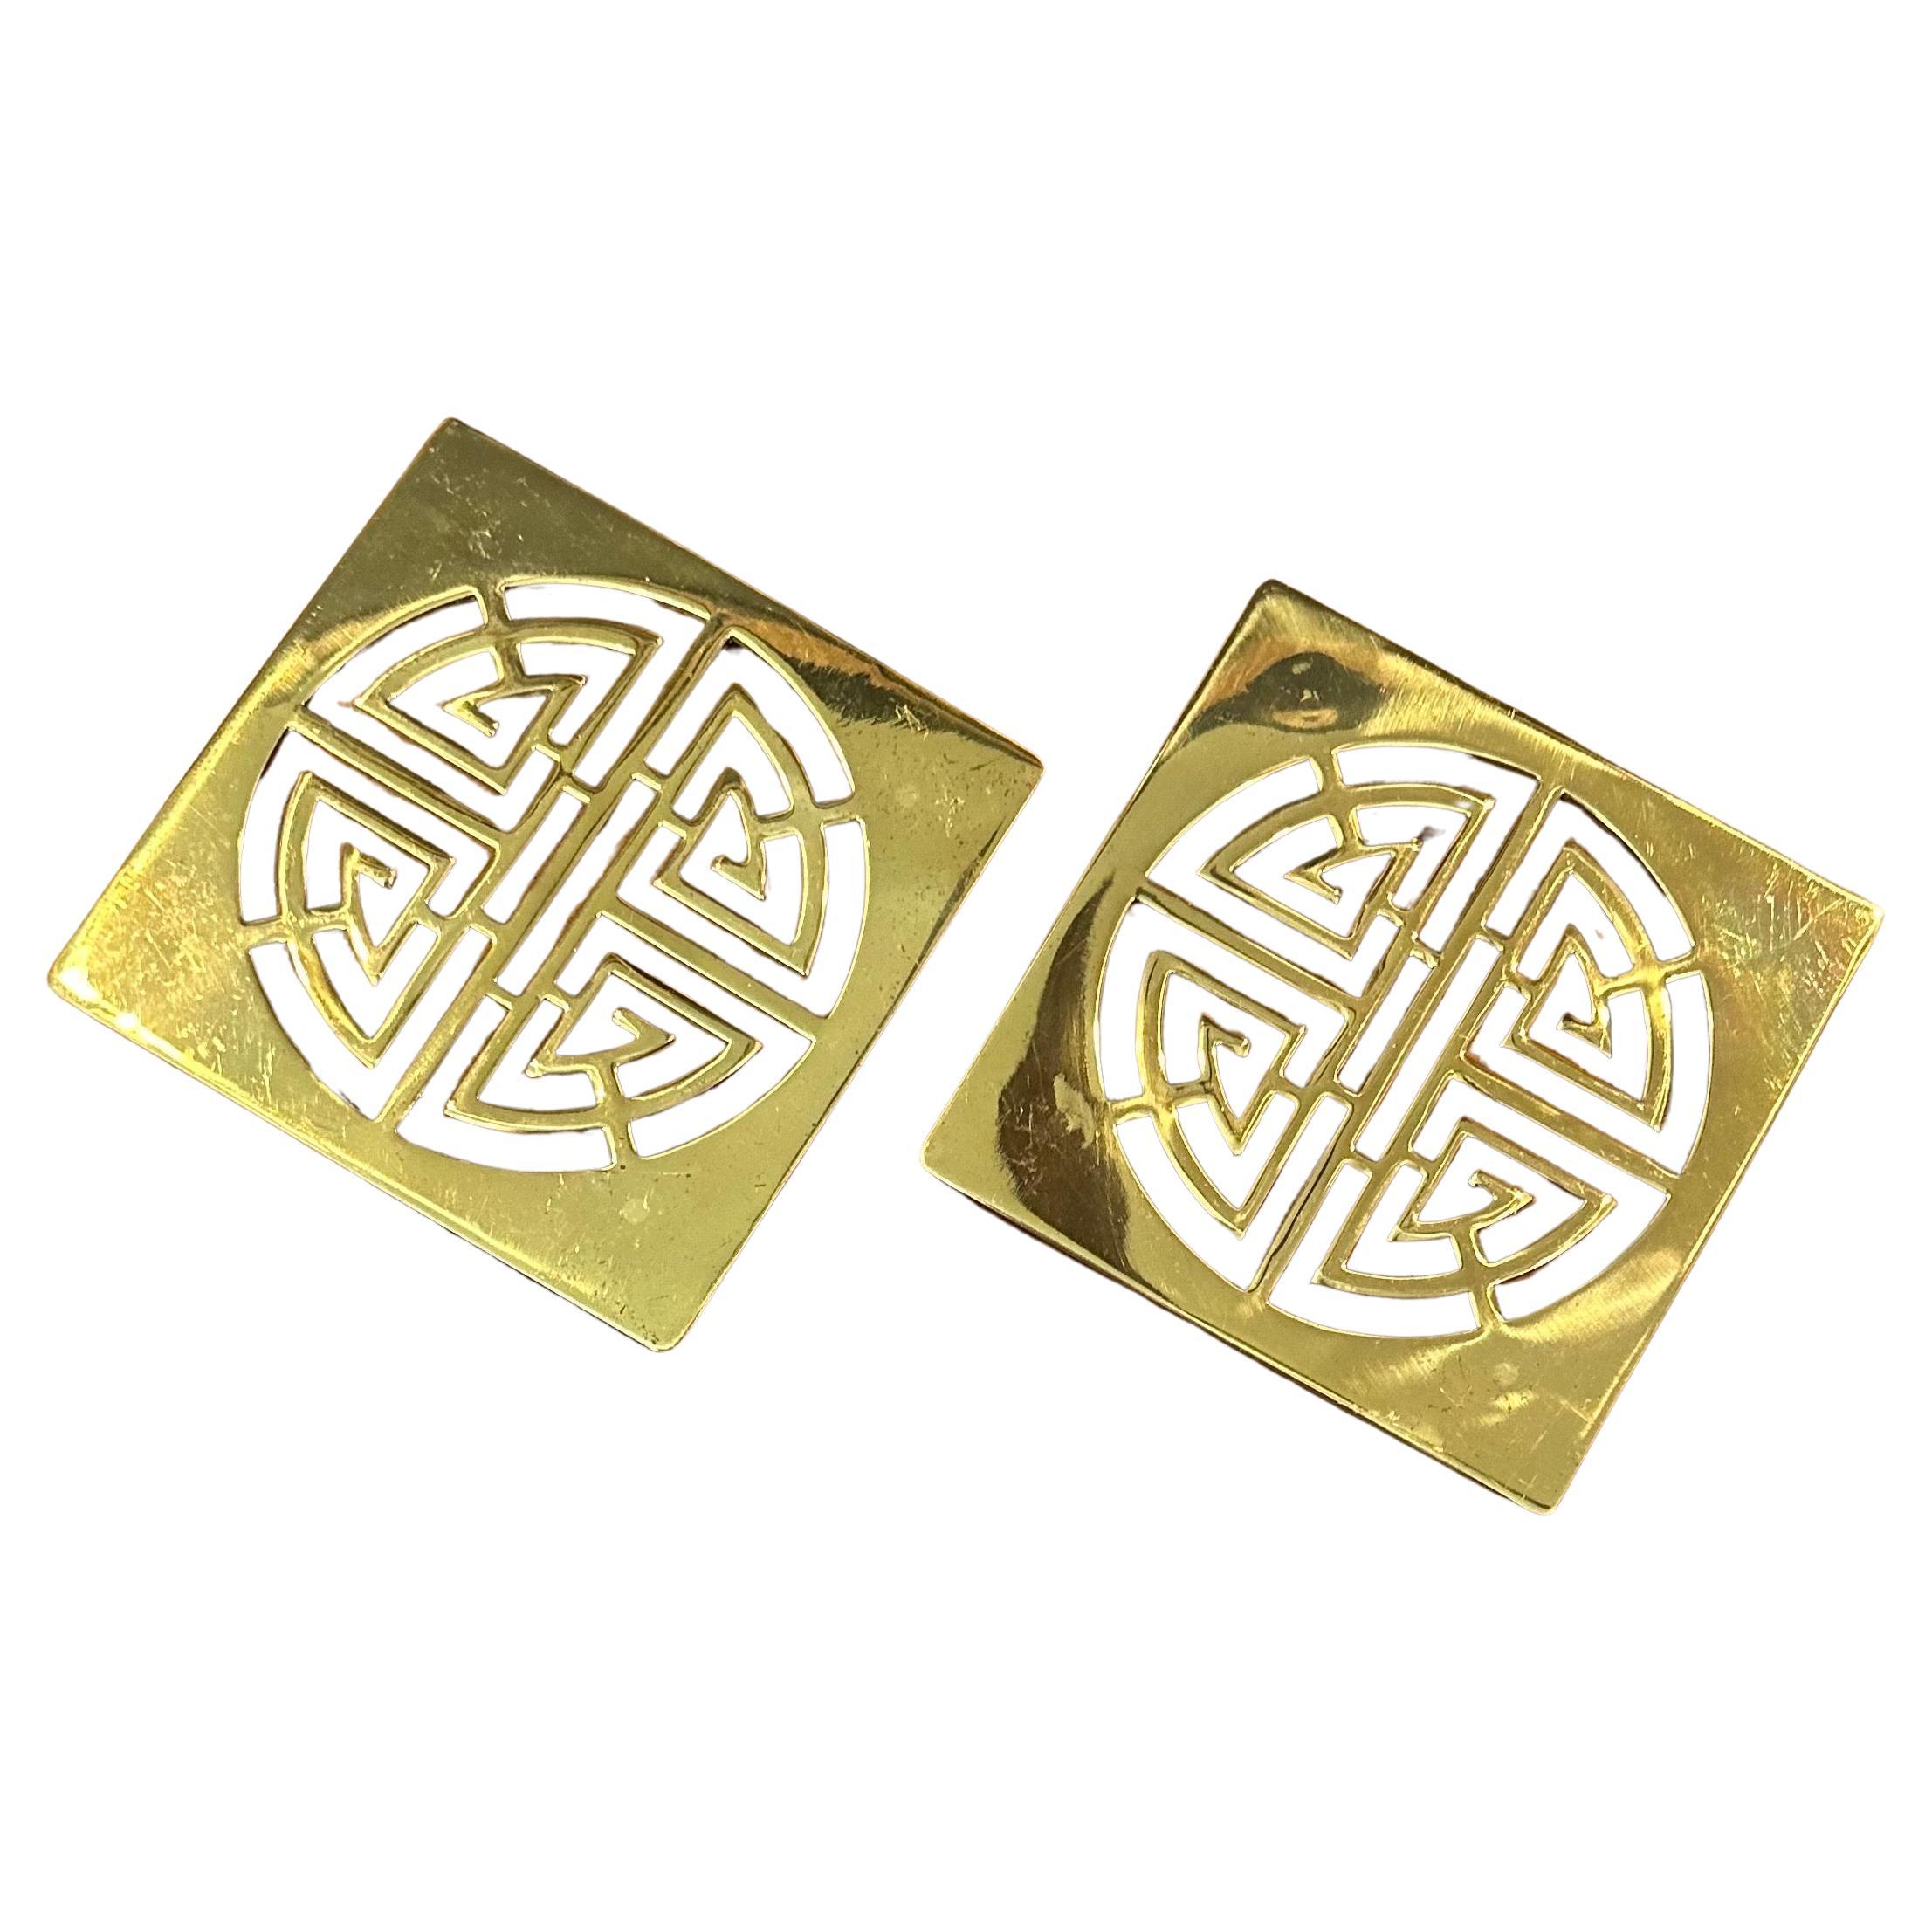 A very nice pair Asian style brass trivets by Gumps, circa 1970s. The trivets are in very good vintage condition and measures 6.5